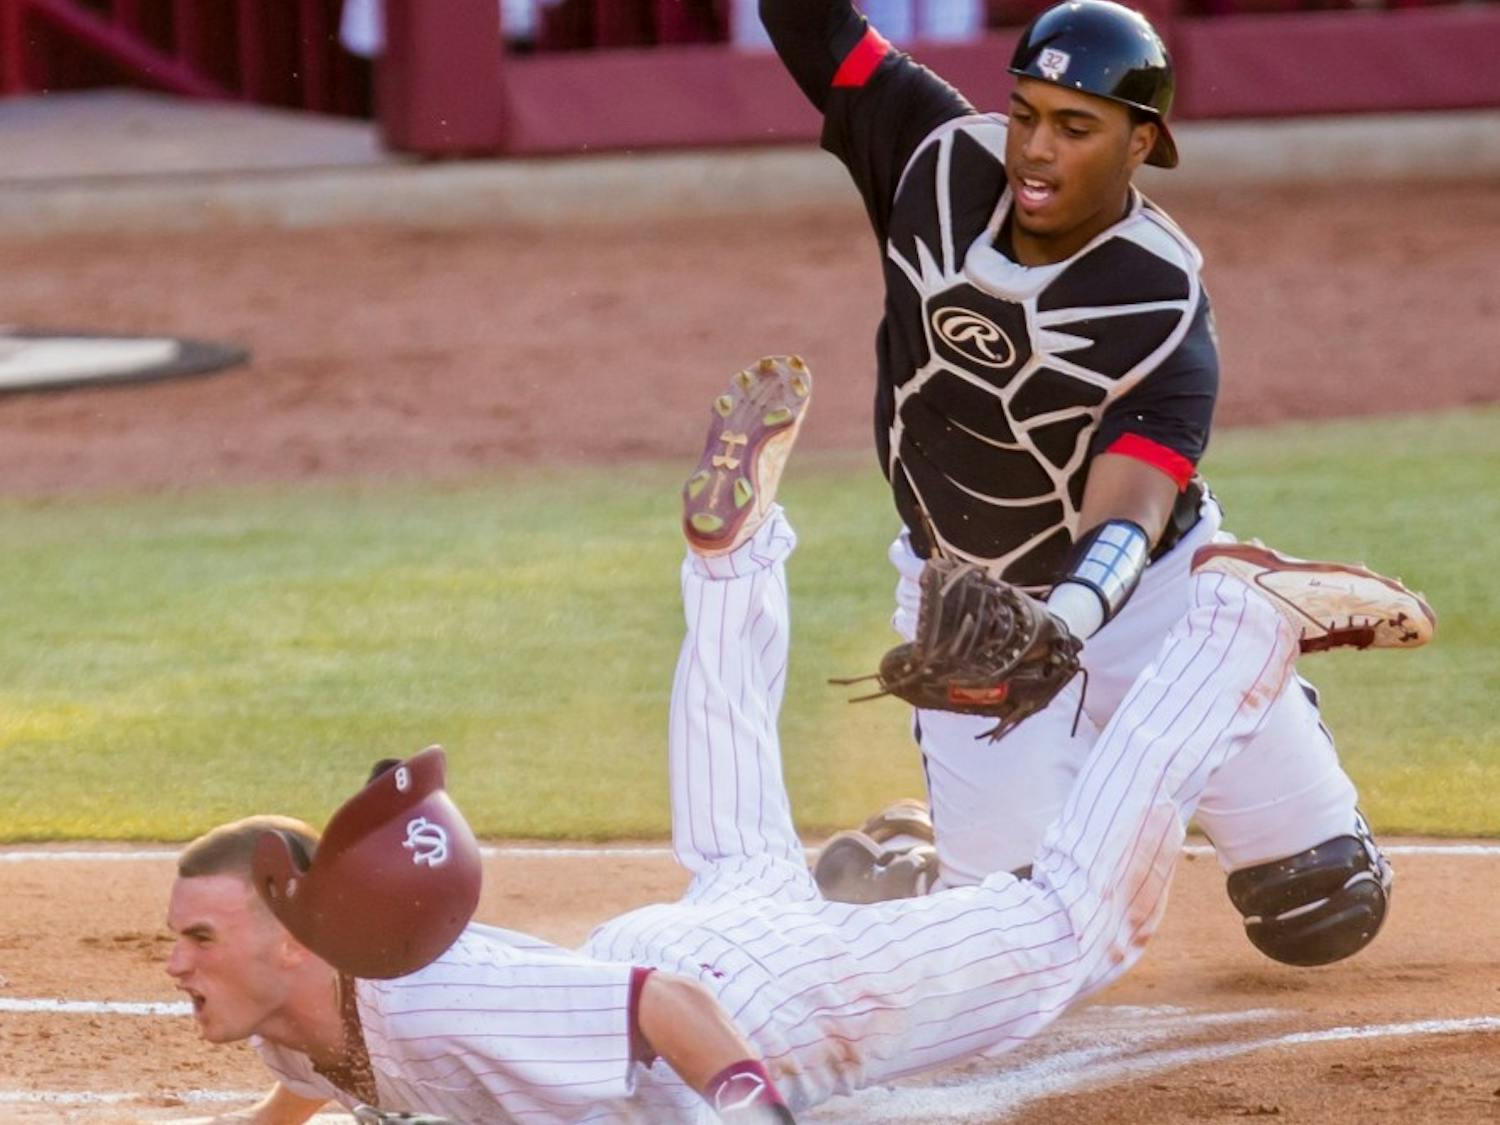 South Carolina shortstop Marcus Mooney (8) scores ahead of the tag of Maryland catcher Kevin Martir (32) on Sunday, June 1, 2014, in Columbia, S.C. Maryland won 10-1. (Jeff Blake/The State/MCT)